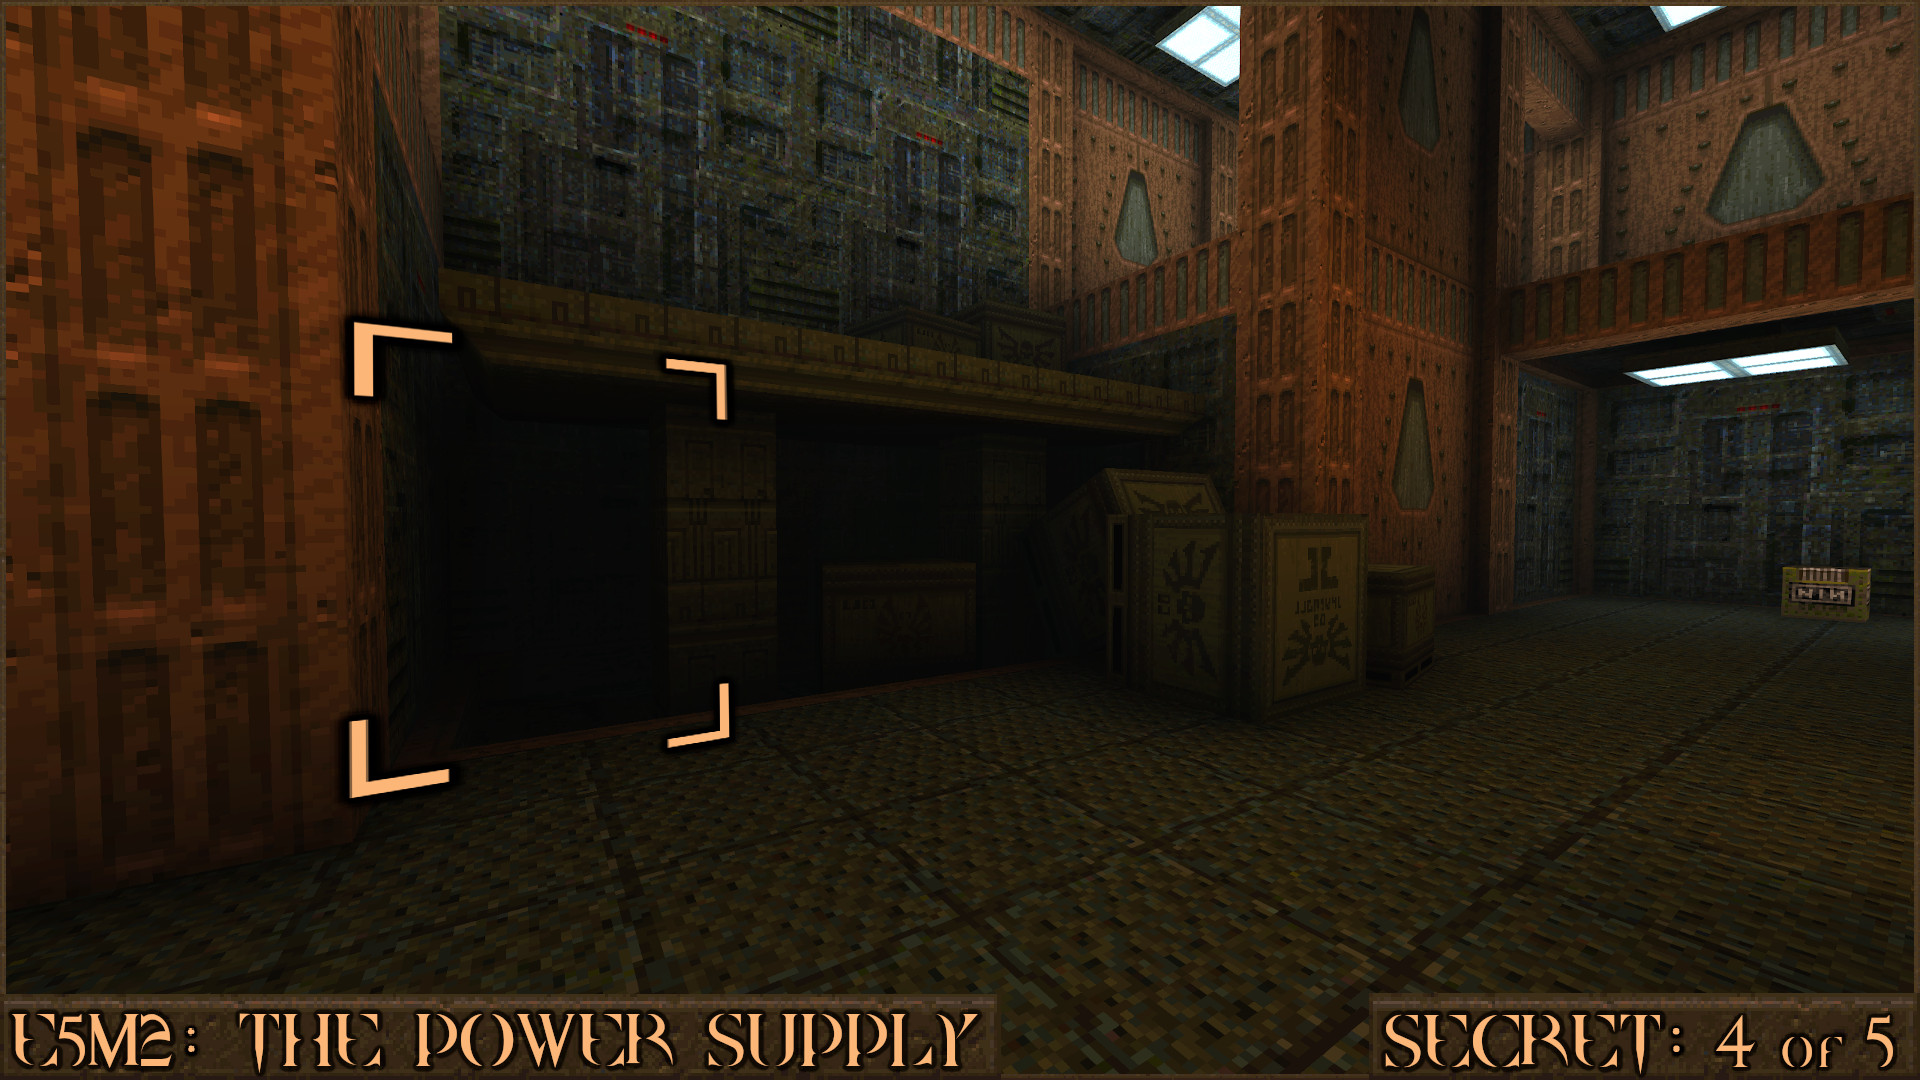 Quake Finding All Secrets in Quake Expansion pack: Dimension of the Past - E5M2: The Power Supply - 888901C